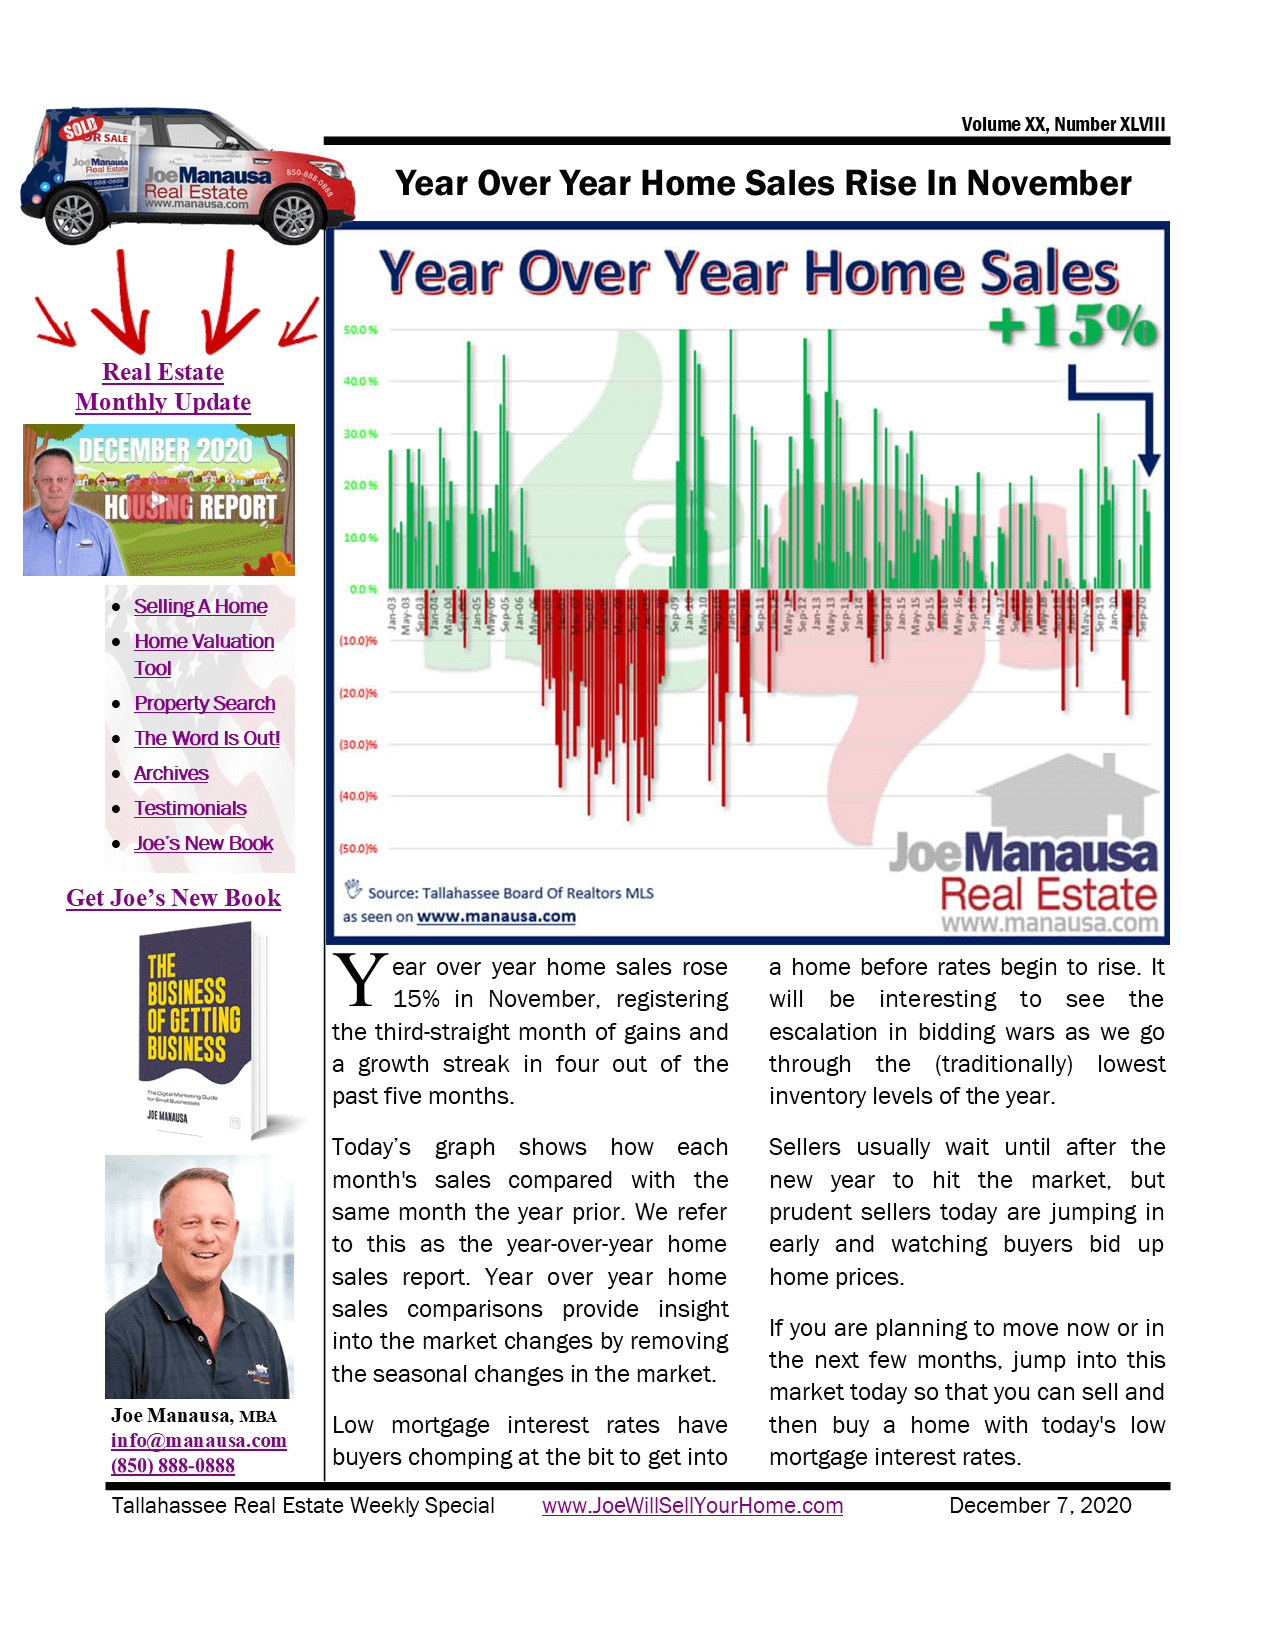 Year Over Year Home Sales Rise Again